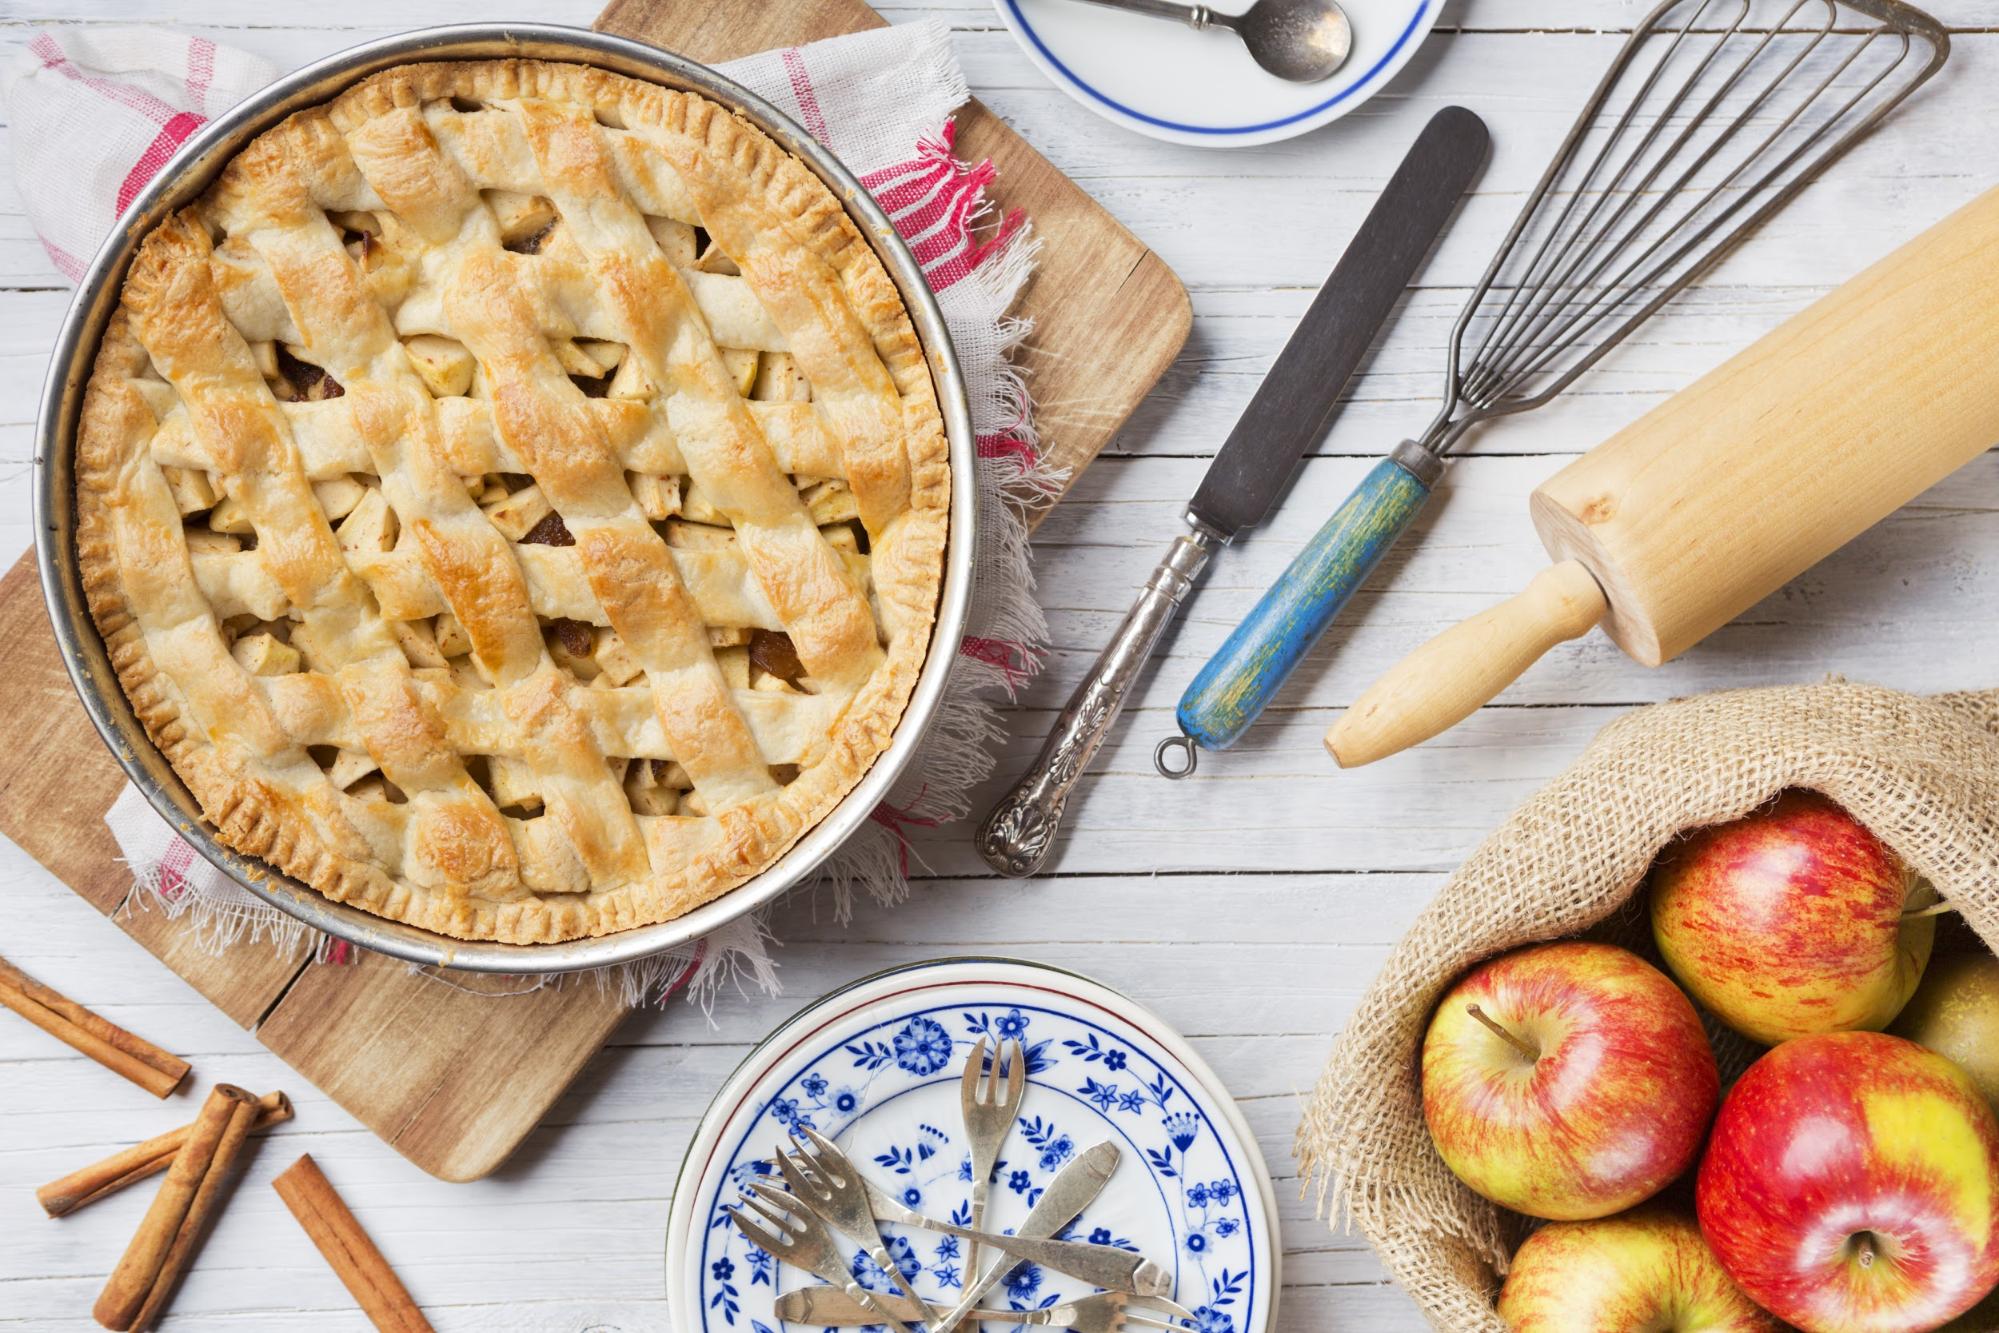 homemade-apple-pie-easy-recipe-and-how-to-make-a-perfect-crust-2019